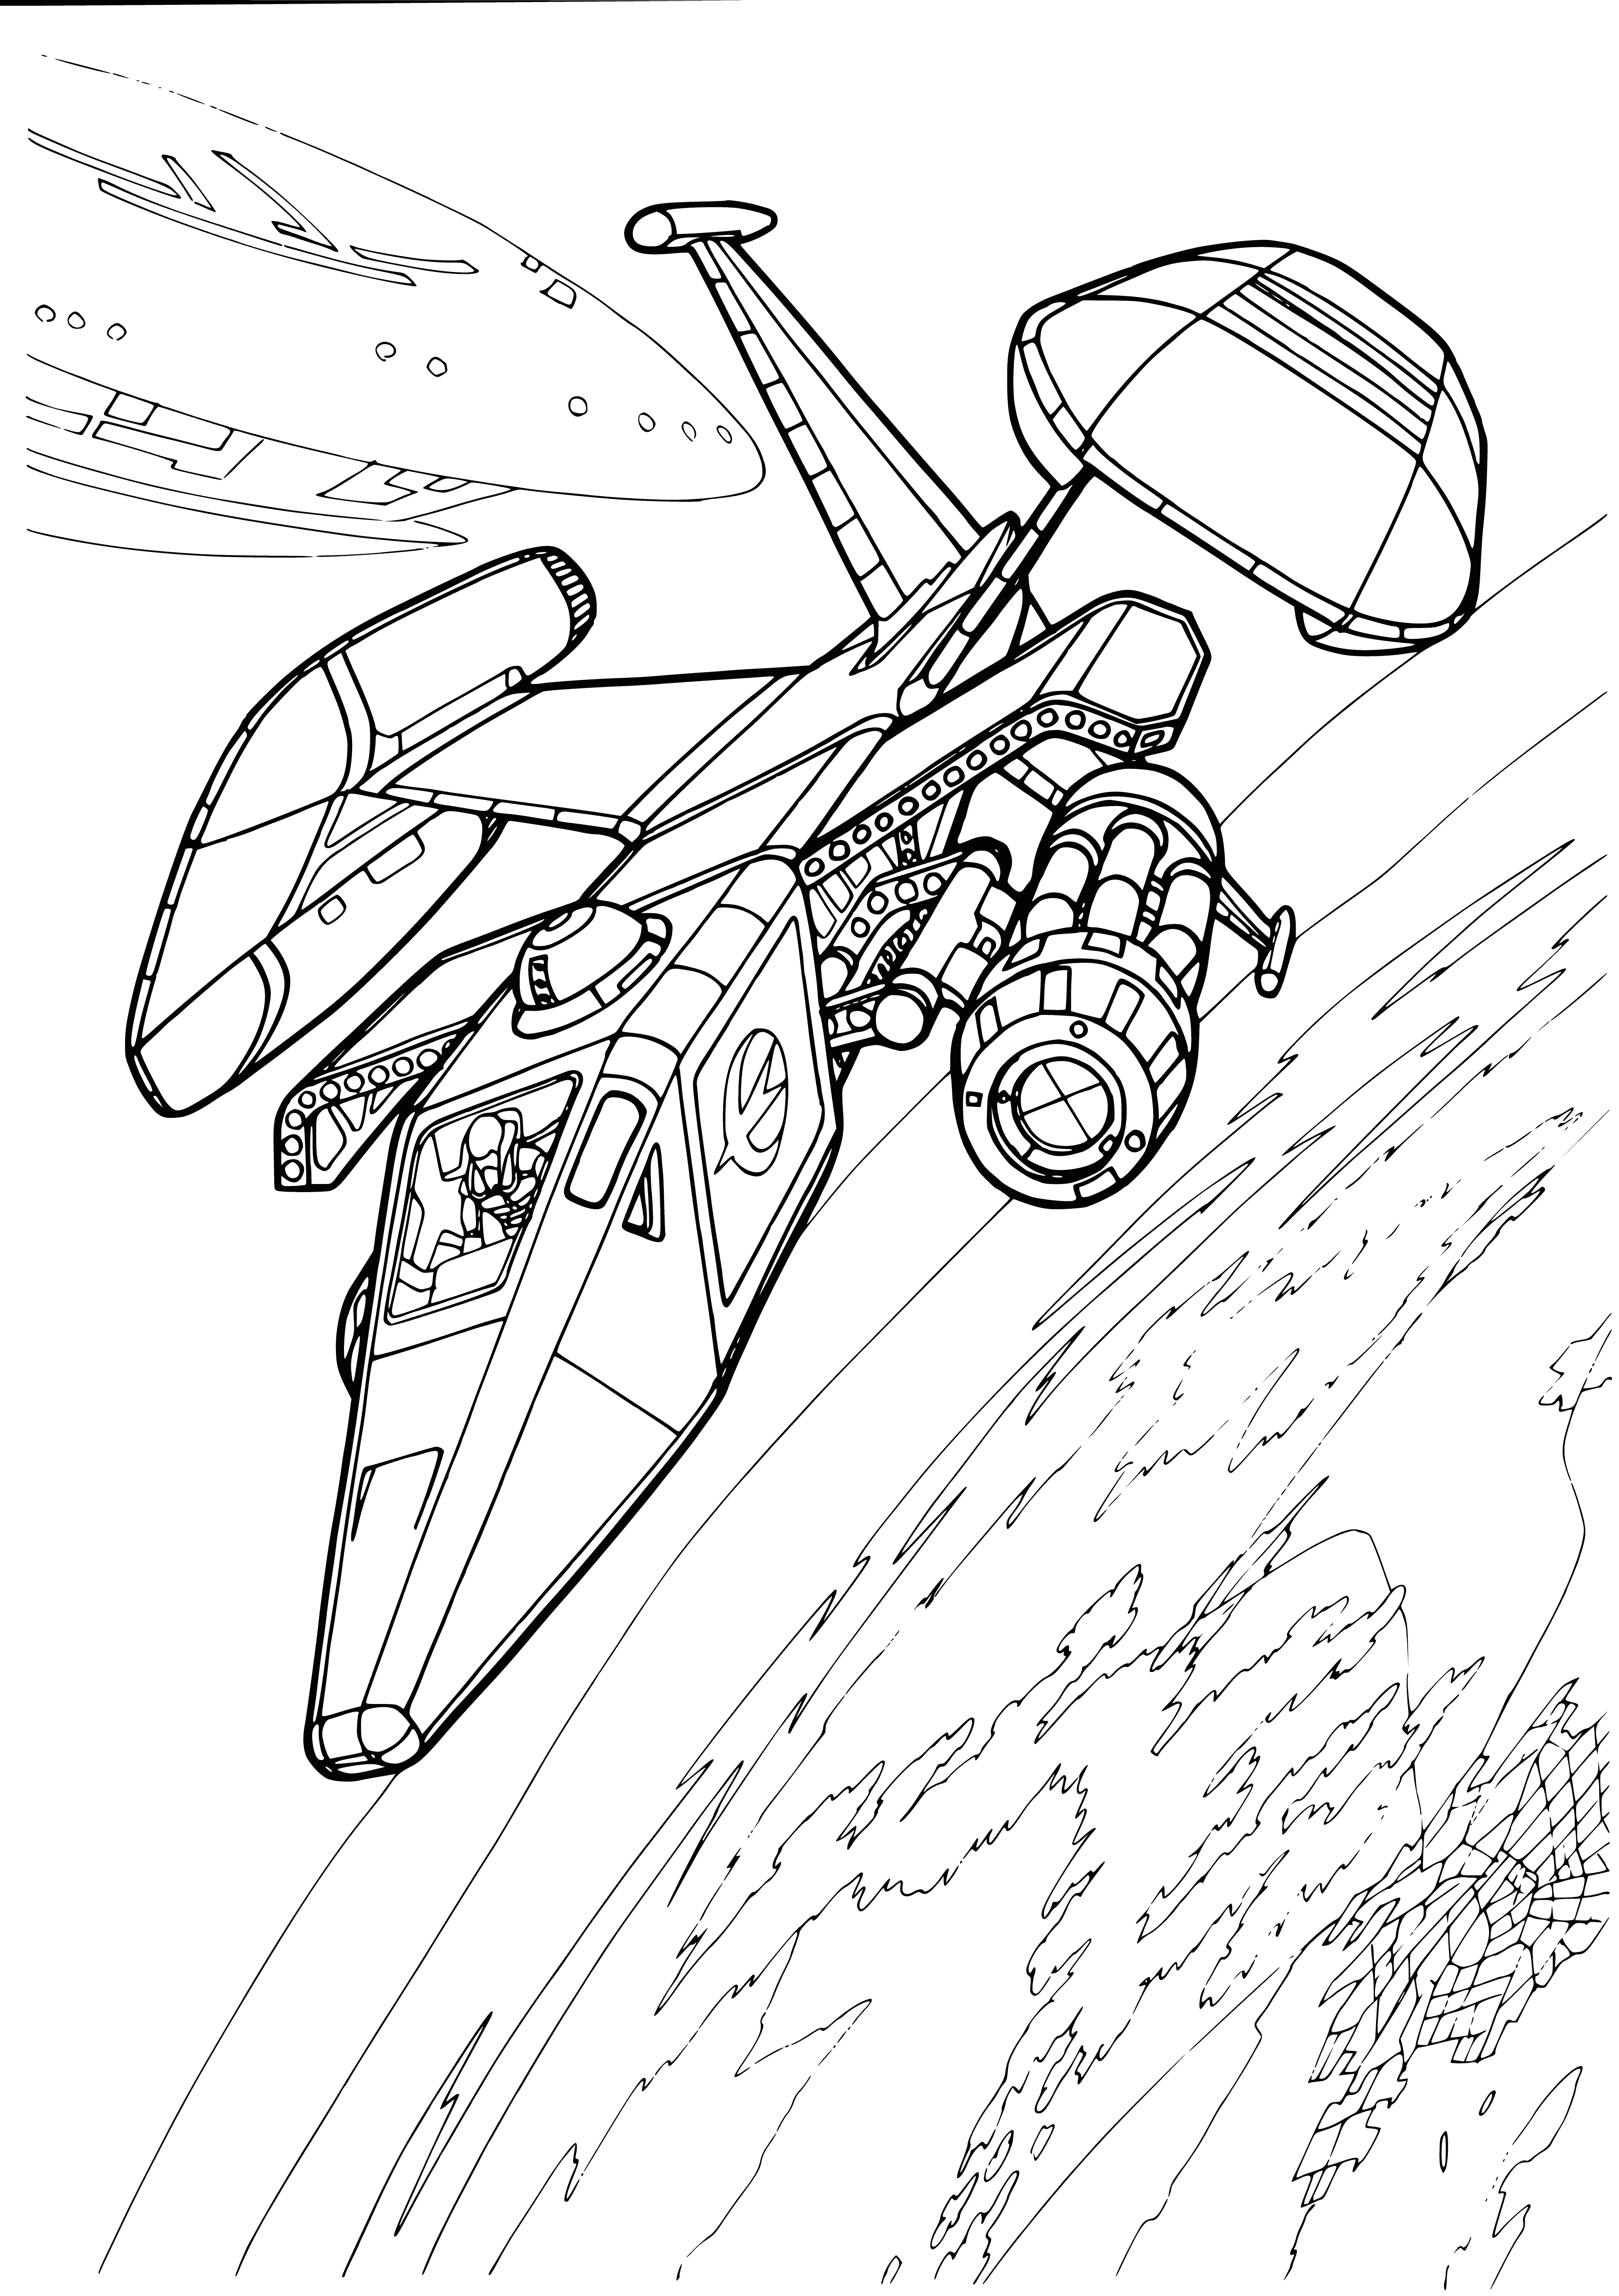 coloring page: Spacecraft zooms through space, passengers snugly seated, ready for takeoff - a future of sleek shapes, stars & windows!